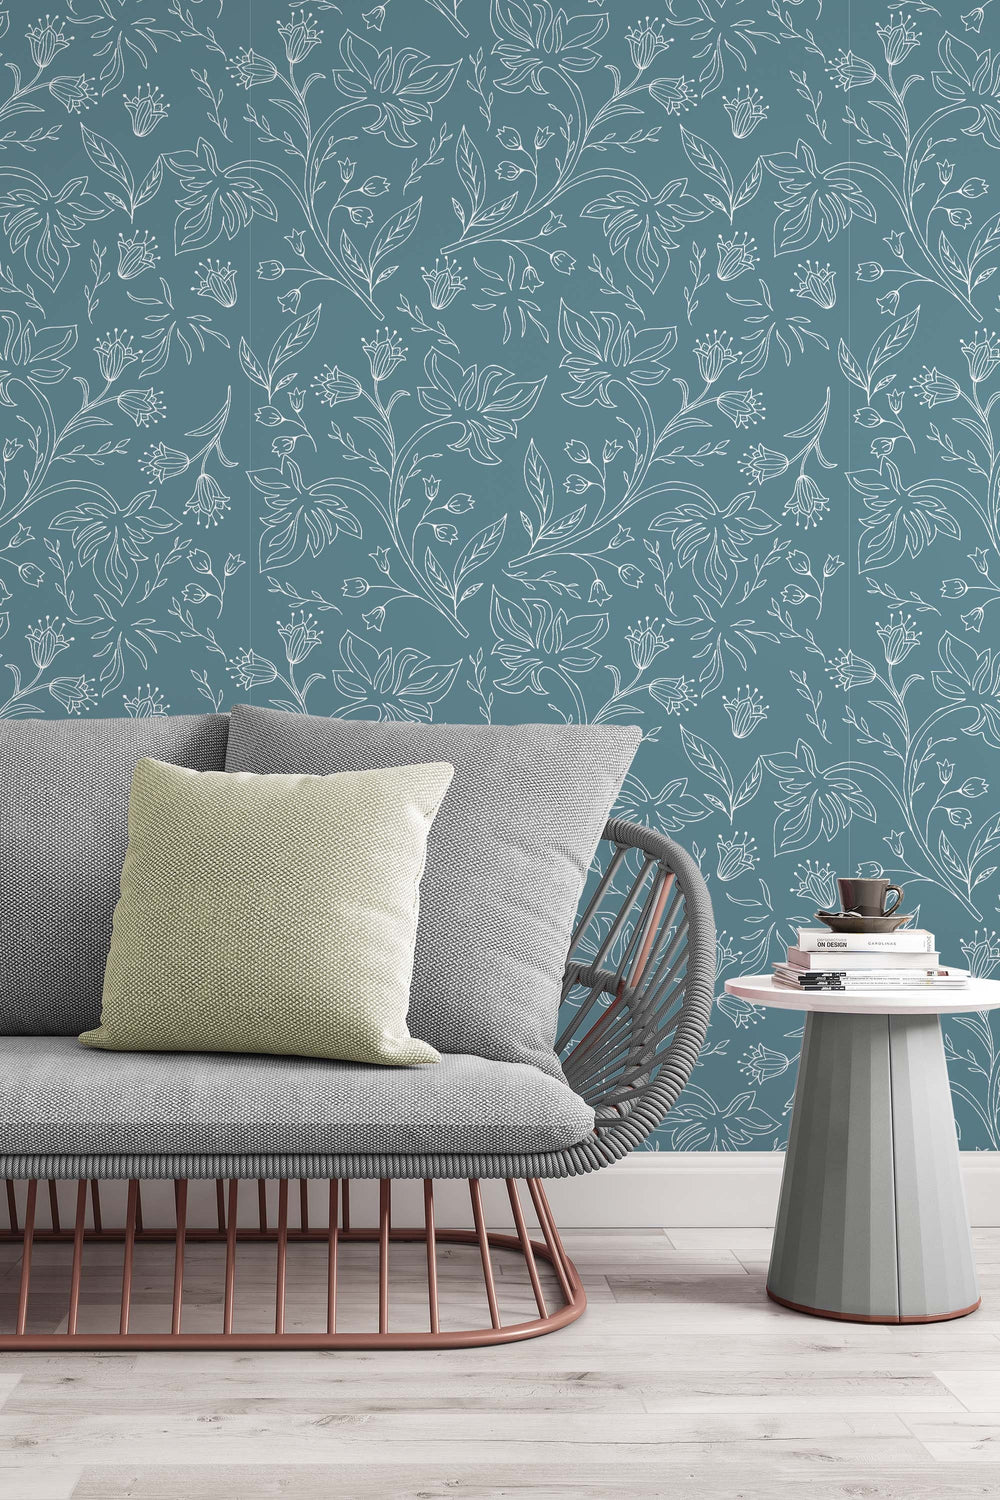 Floral pattern, herbs and flowers in the garden - Peel & Stick Wallpaper - Removable Self Adhesive and Traditional wallpaper #533100 /1040